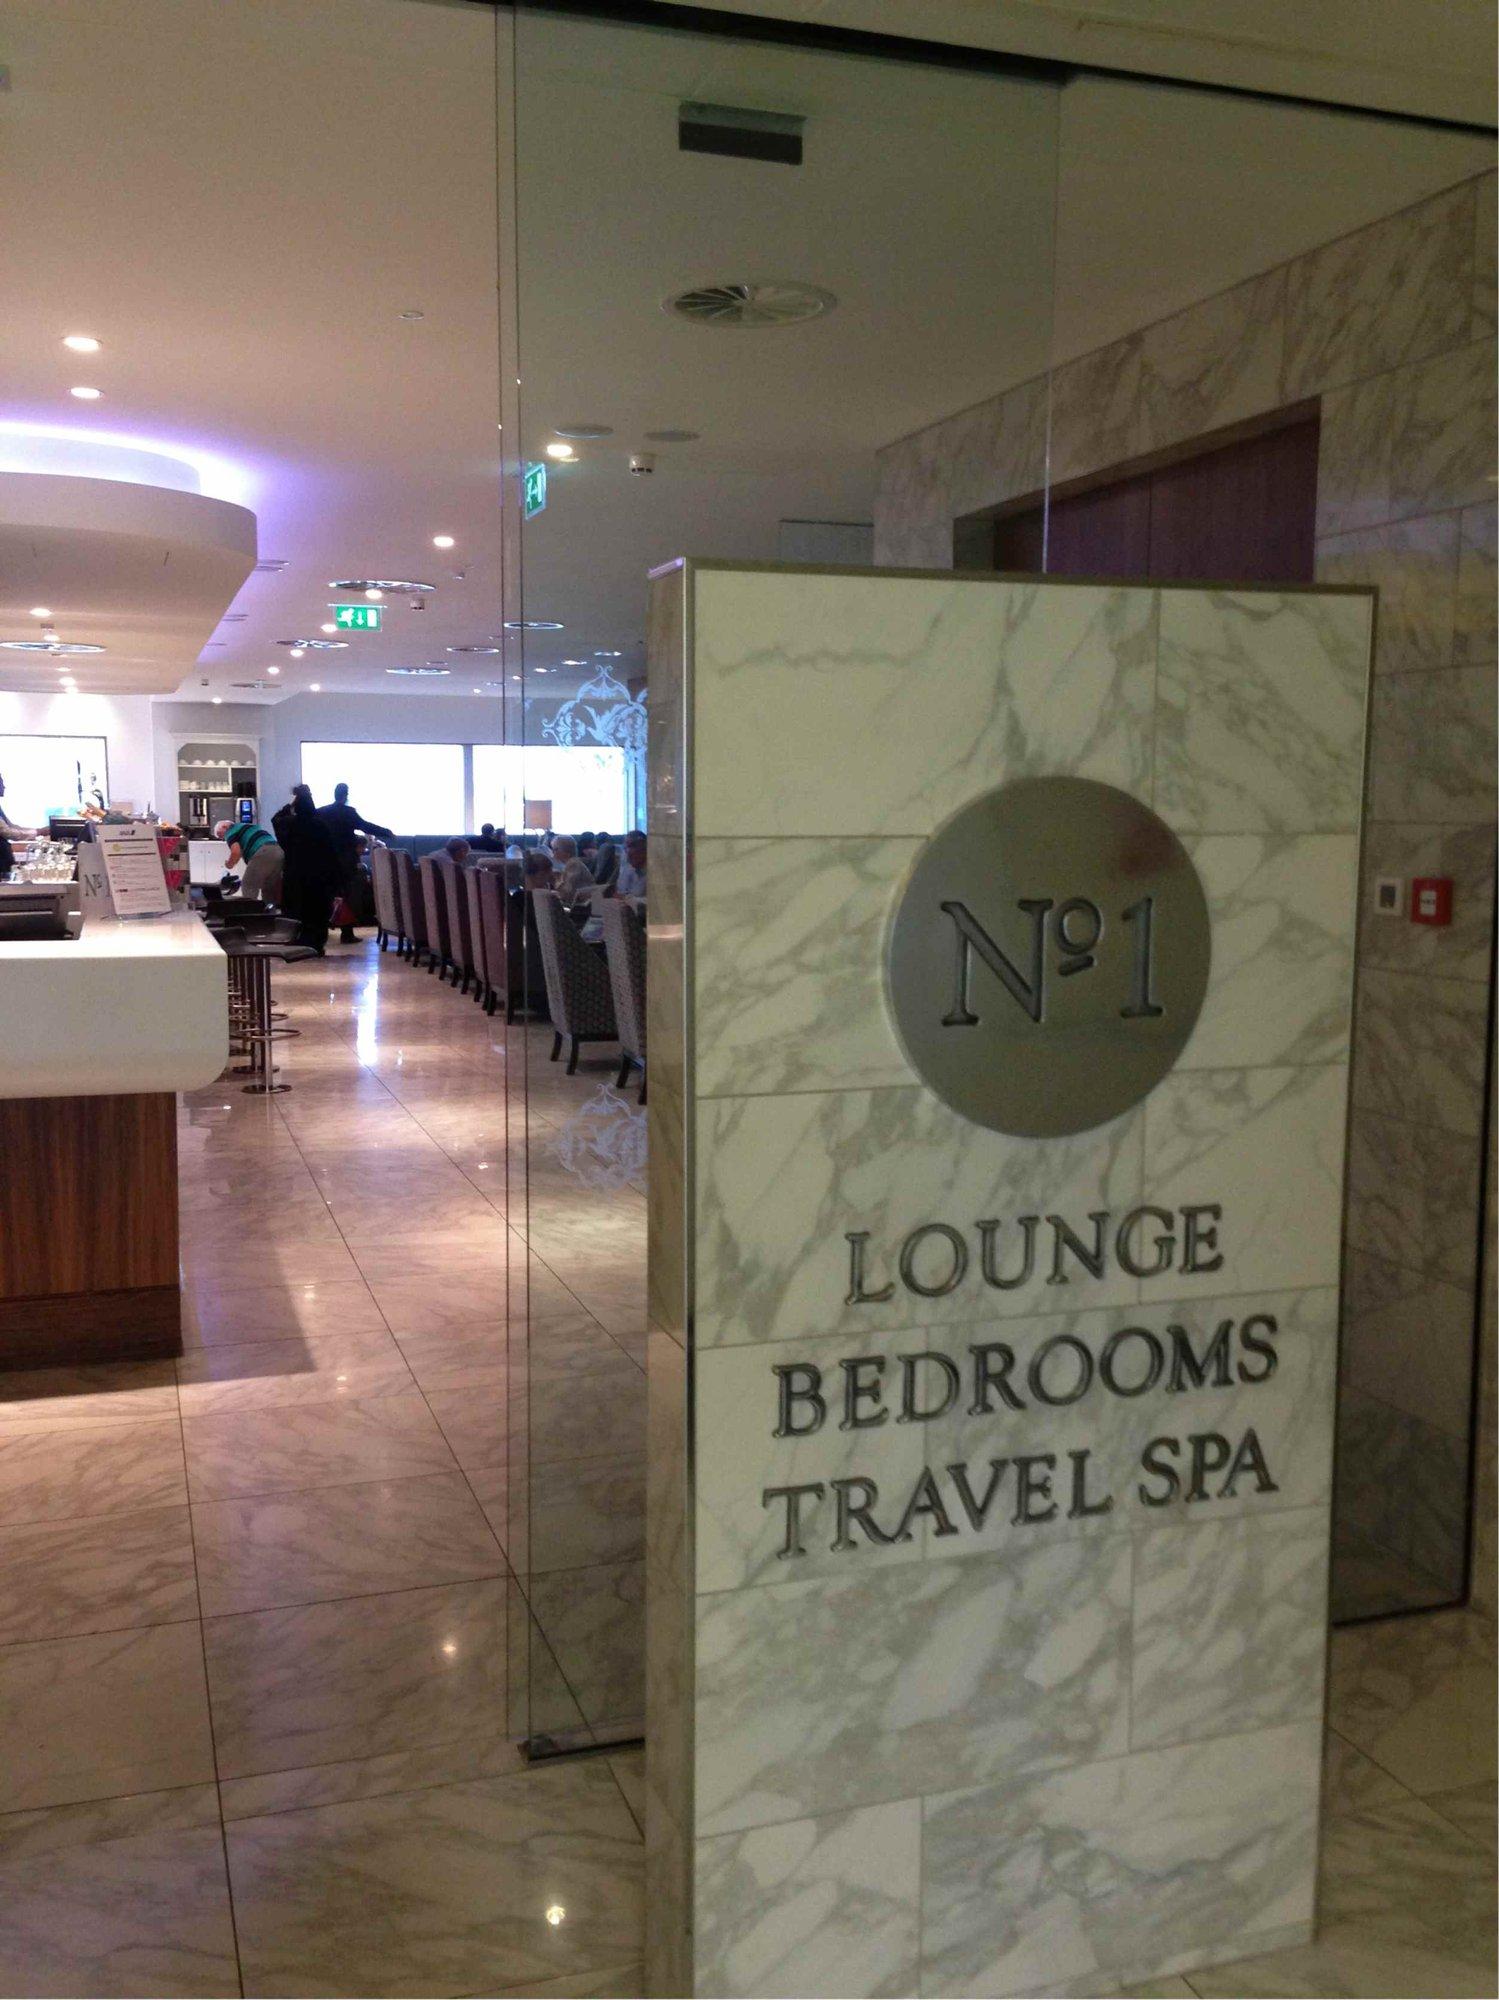 No1 Lounges, Heathrow Terminal 3 image 8 of 33